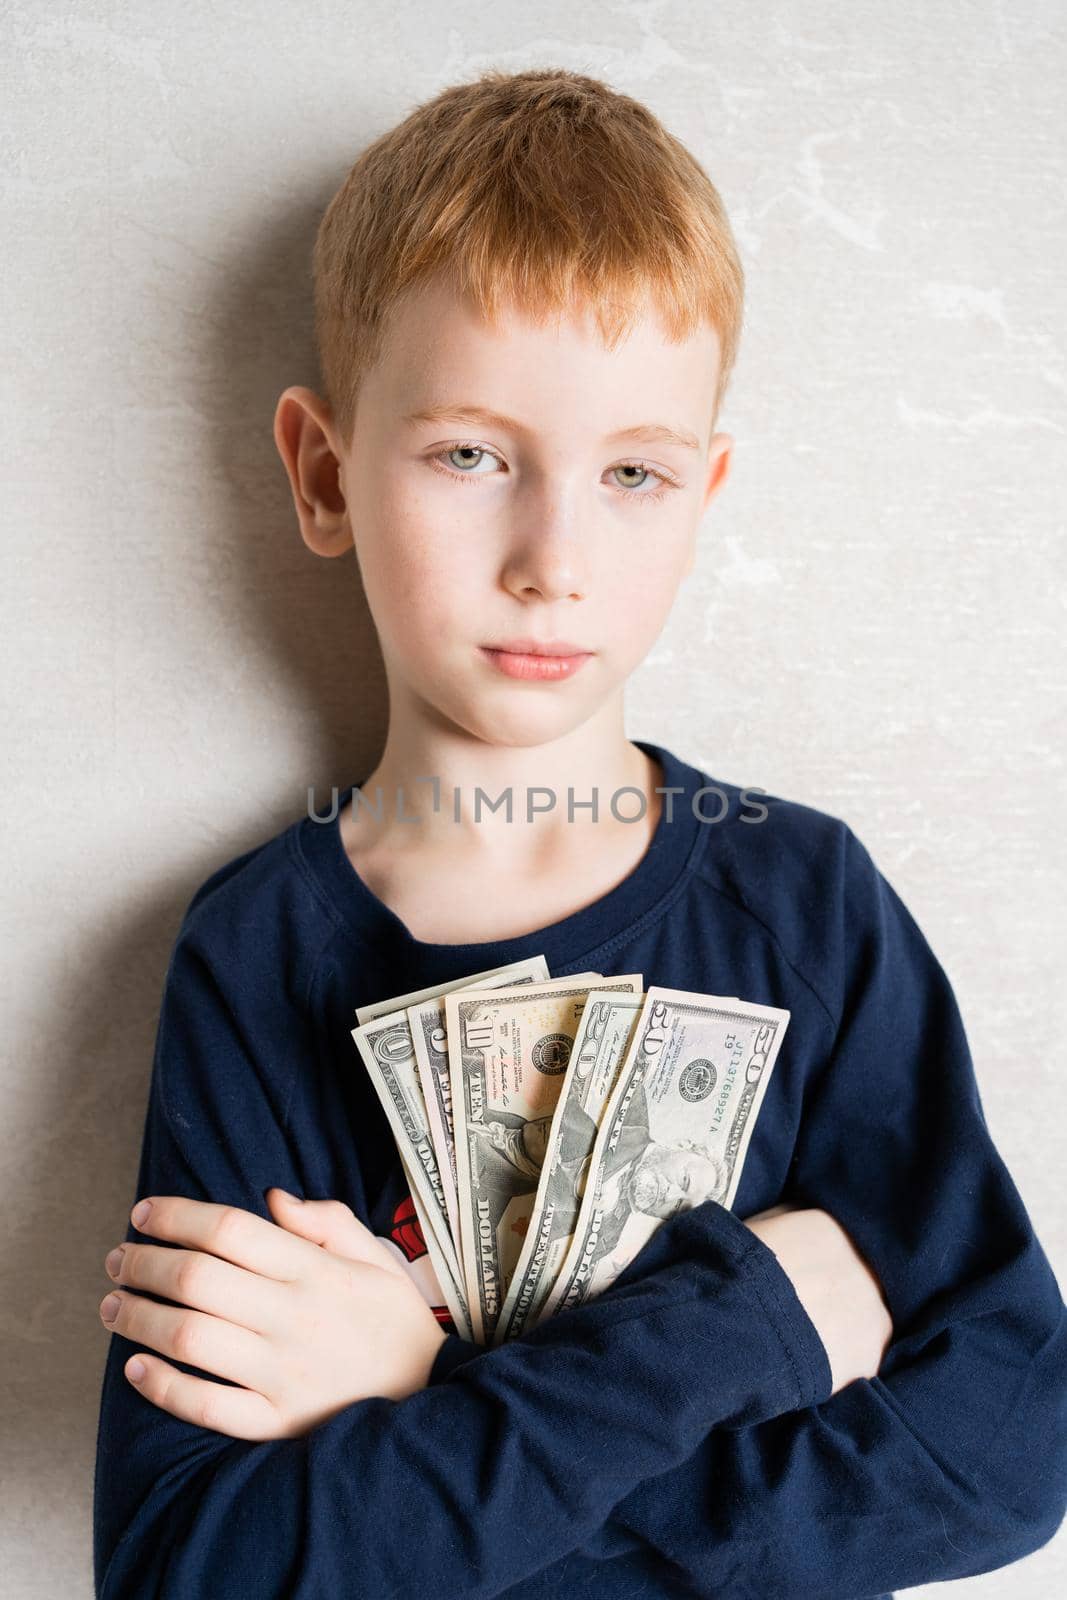 a red-haired boy, with his arms crossed on his chest, holds in his hands the first money earned, dollars. The look of a self-confident person looking at others from a high